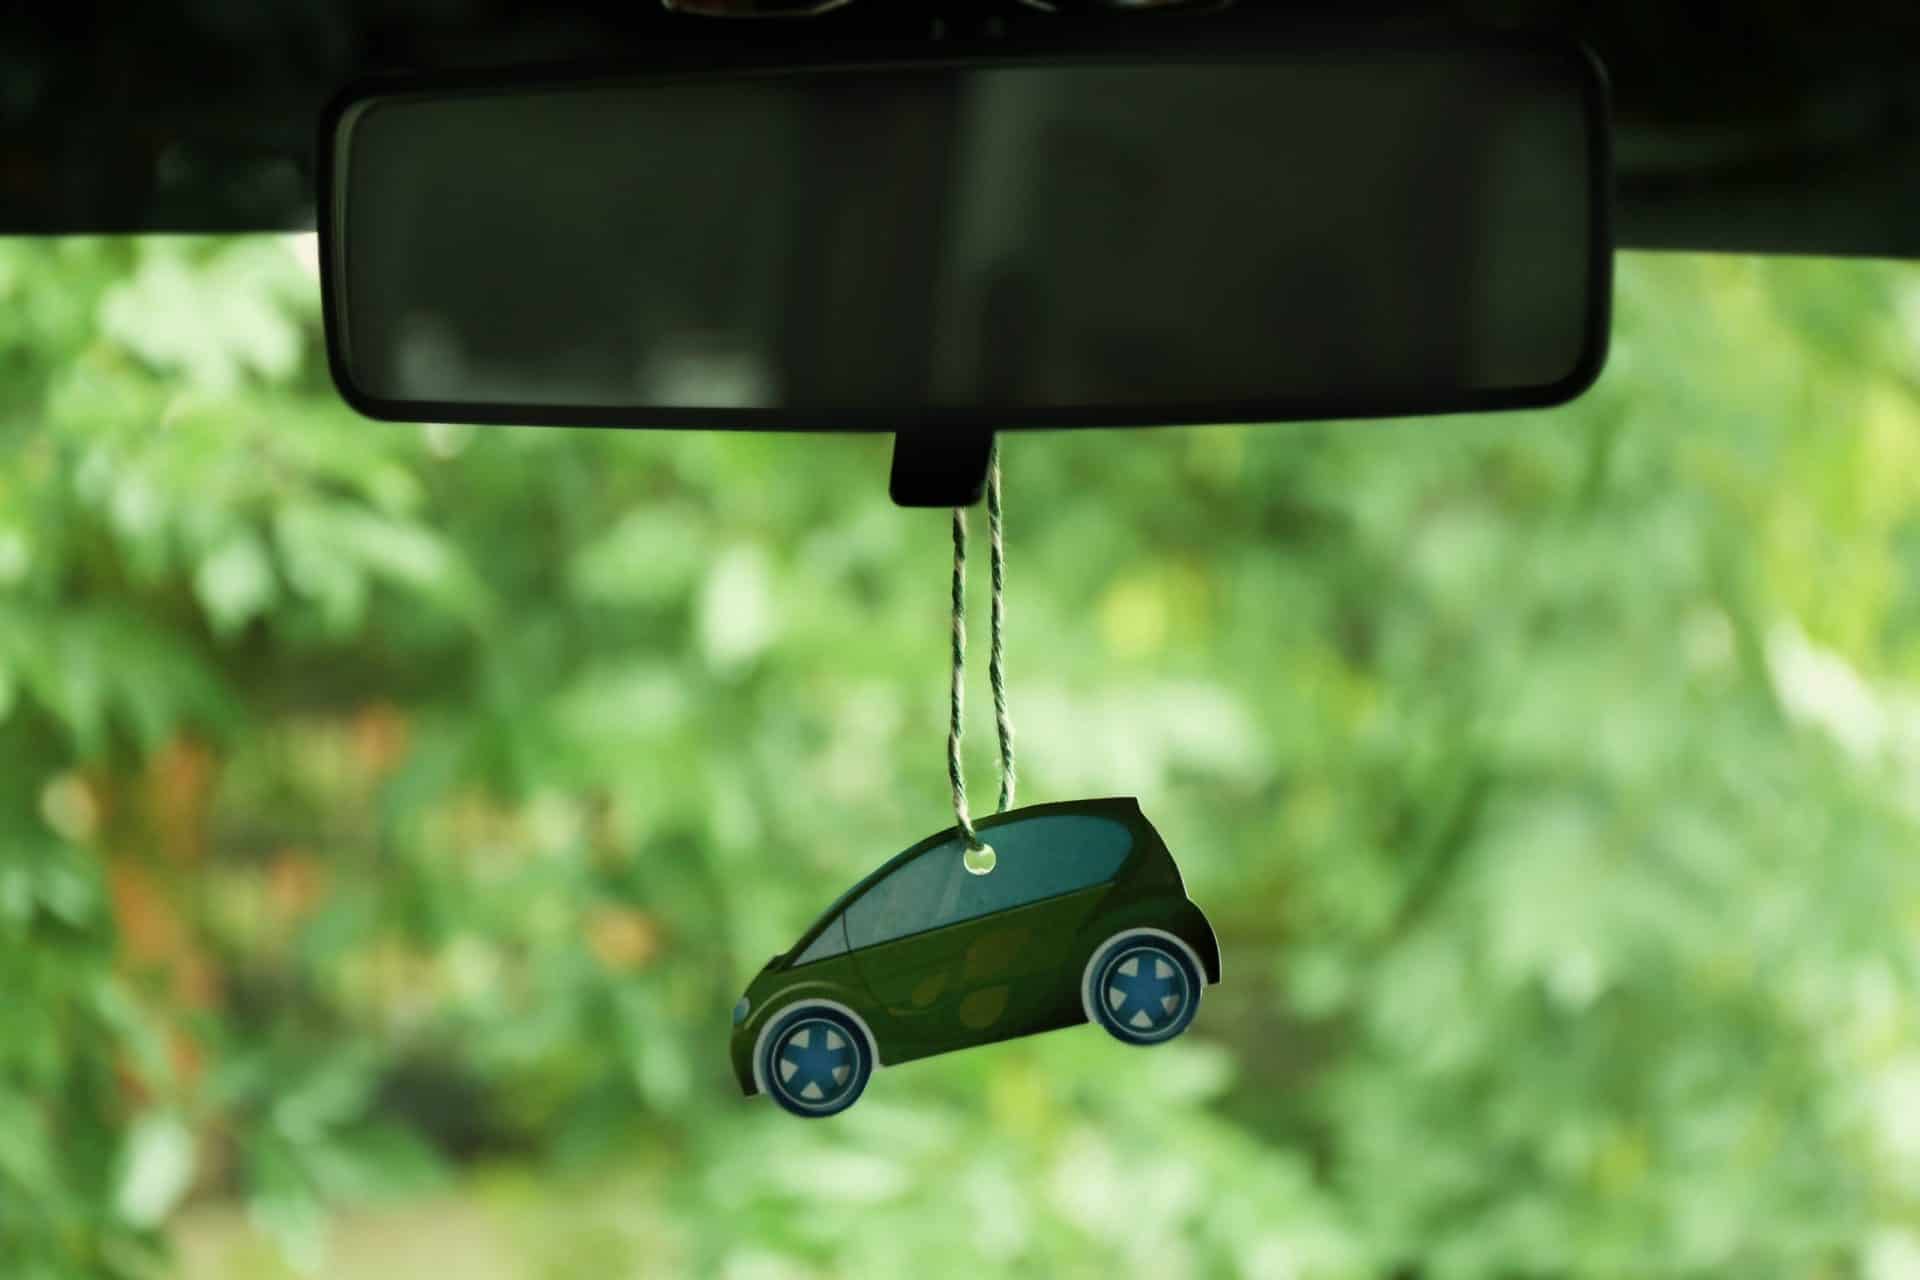 Best Place to Put Car Air Freshener